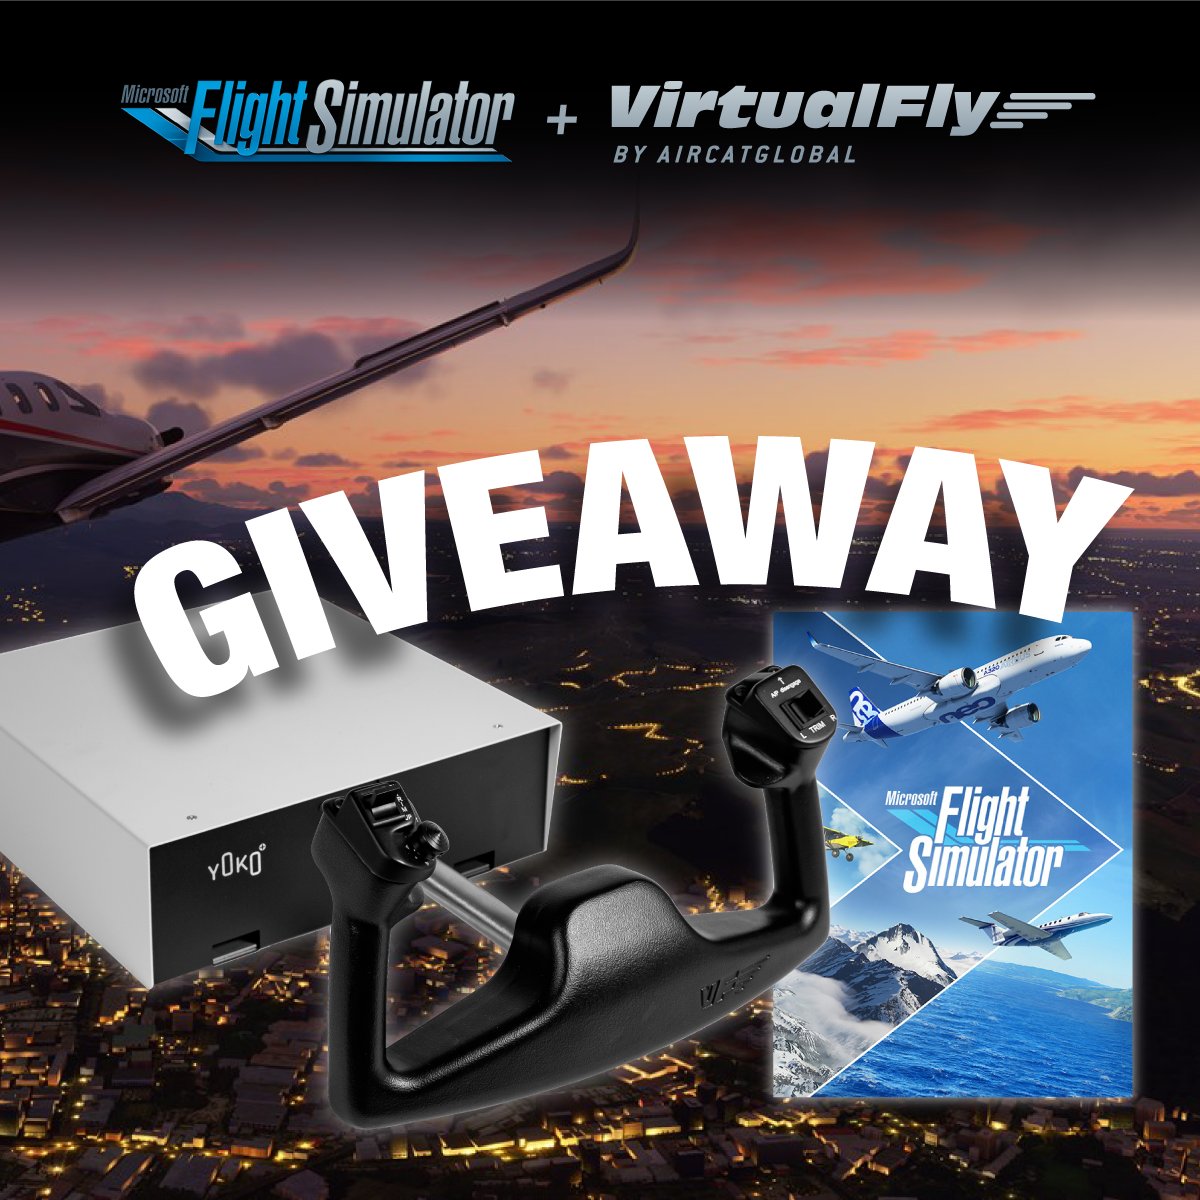 We’ve partnered with @VirtualFly1 to give away their High-End flight controls + a Premium Deluxe copy of MSFS! Starting off with their awesome Yoko+ ‘The Yoke’! To enter: 1. Like us + @VirtualFly1 2. RT Winner will be announced Dec. 1st #MicrosoftFlightSimulator #virtualfly